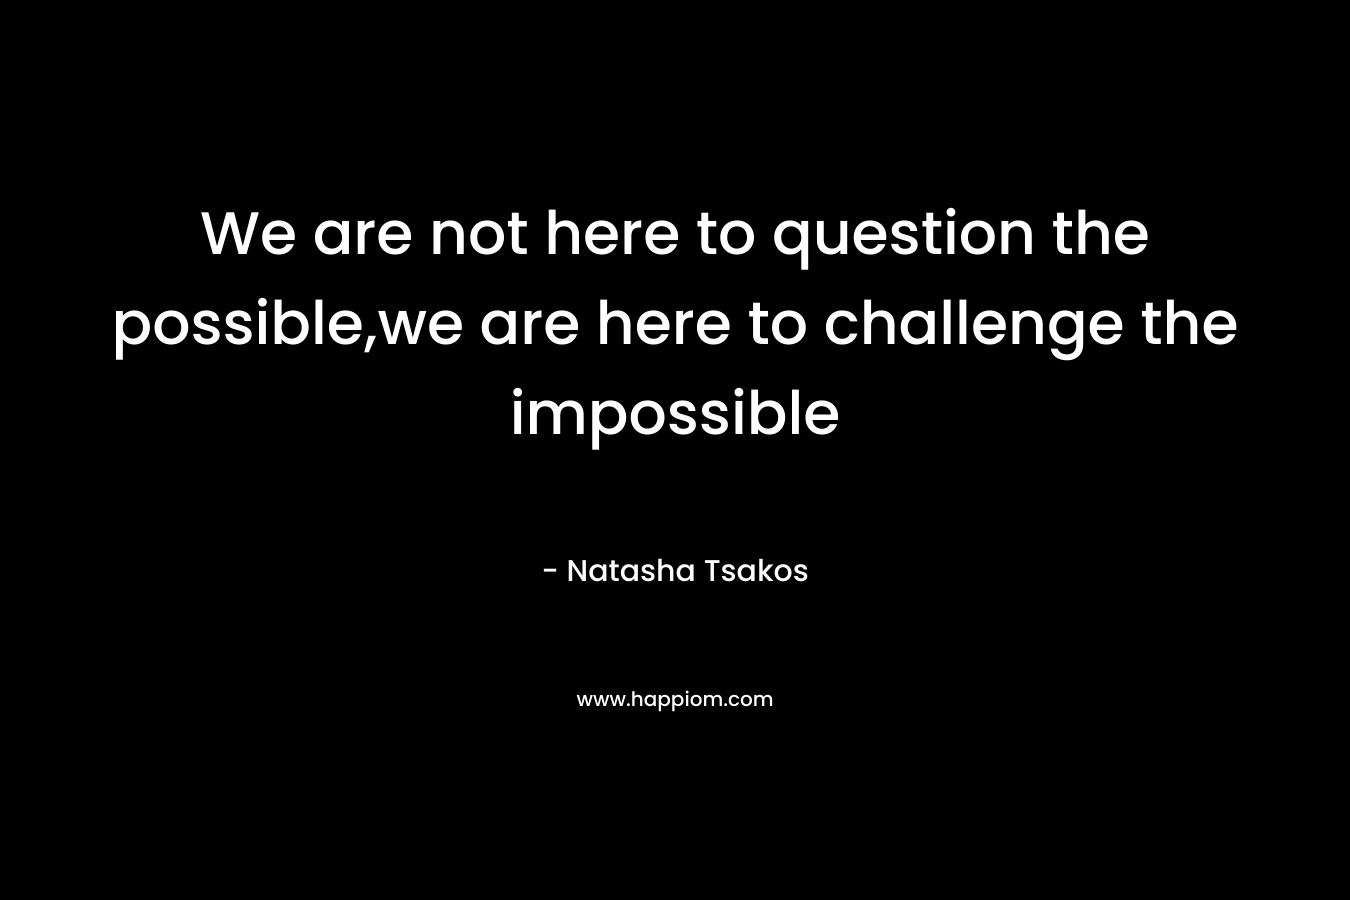 We are not here to question the possible,we are here to challenge the impossible – Natasha Tsakos